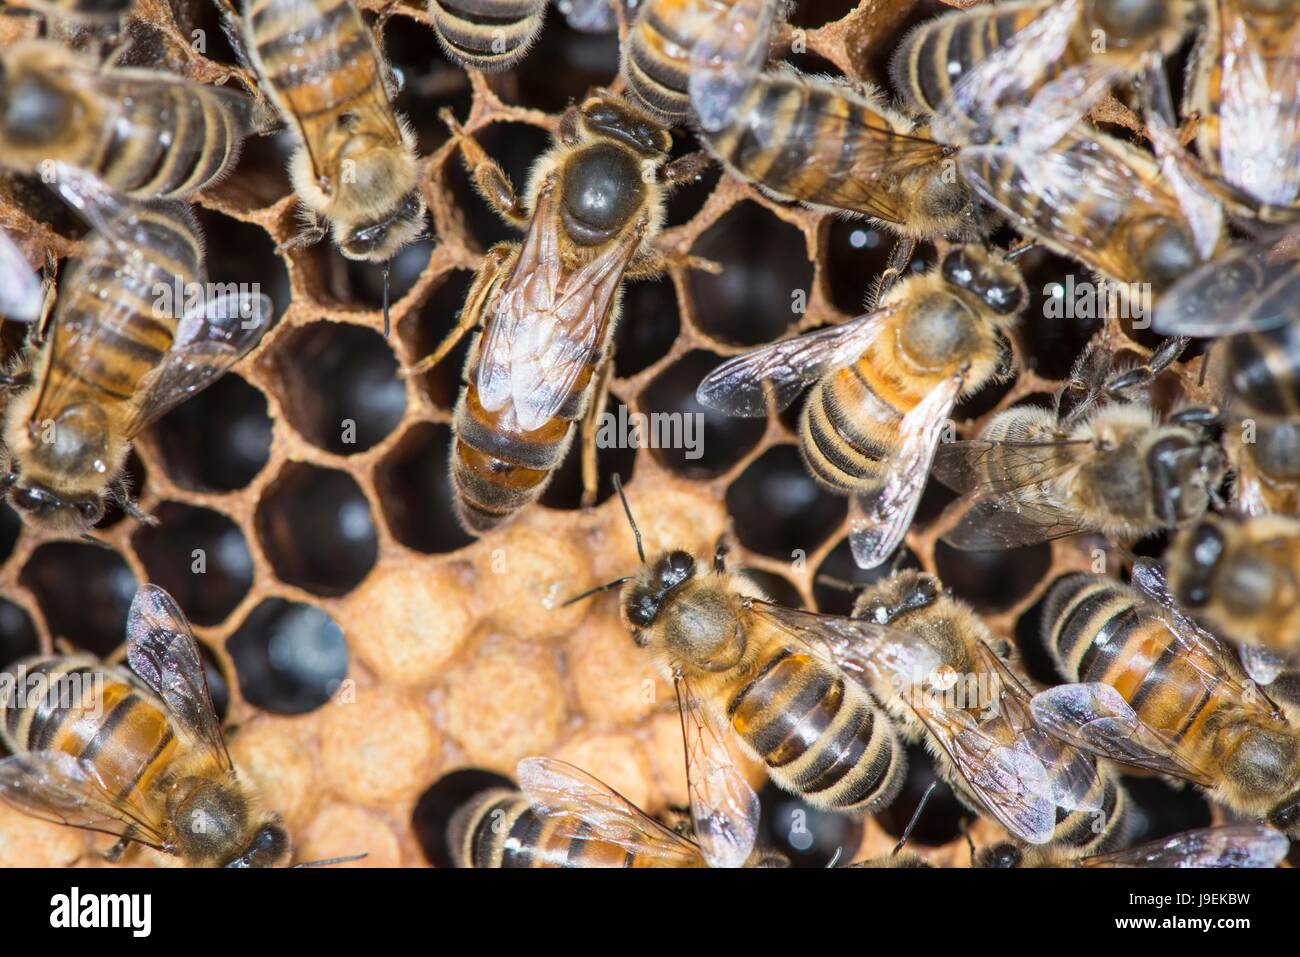 Honey Bee colony showing queen bee & female worker bees on brood chamber comb. Stock Photo